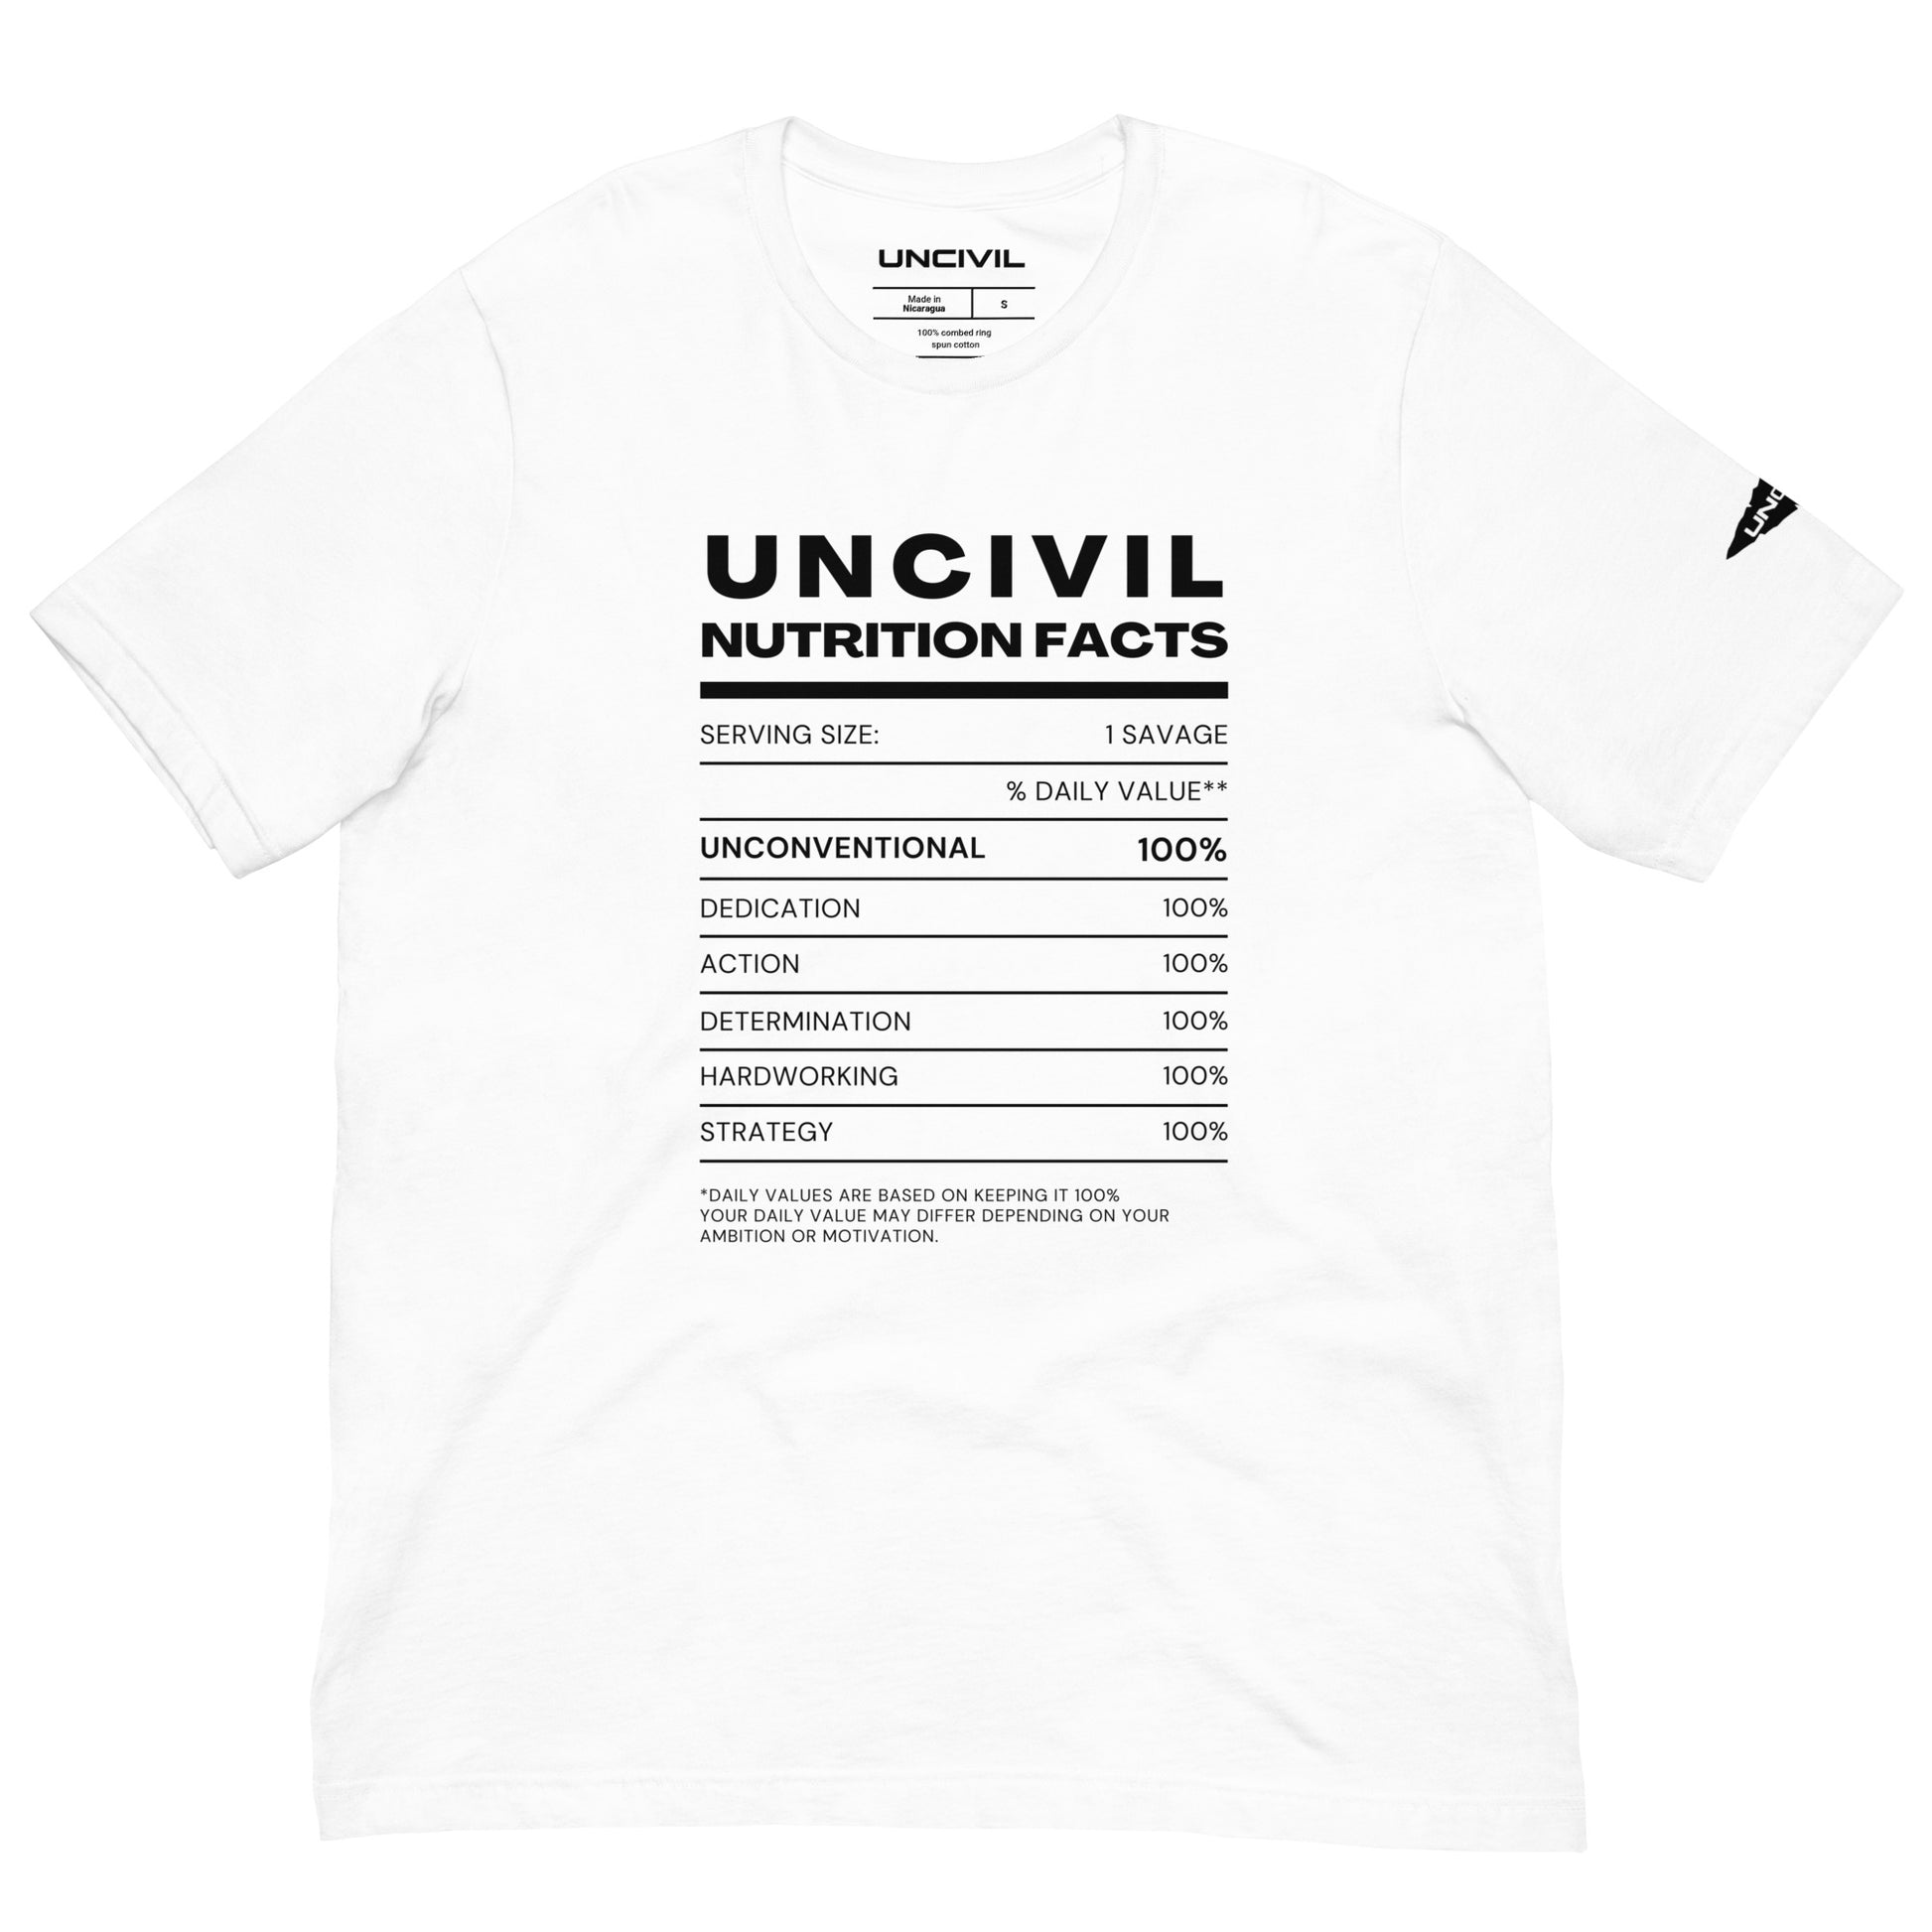 Our UNCIVIL Nutritional facts, Unconventional, dedicated, action, determination, hardworking, & strategy. White unisex shirt.